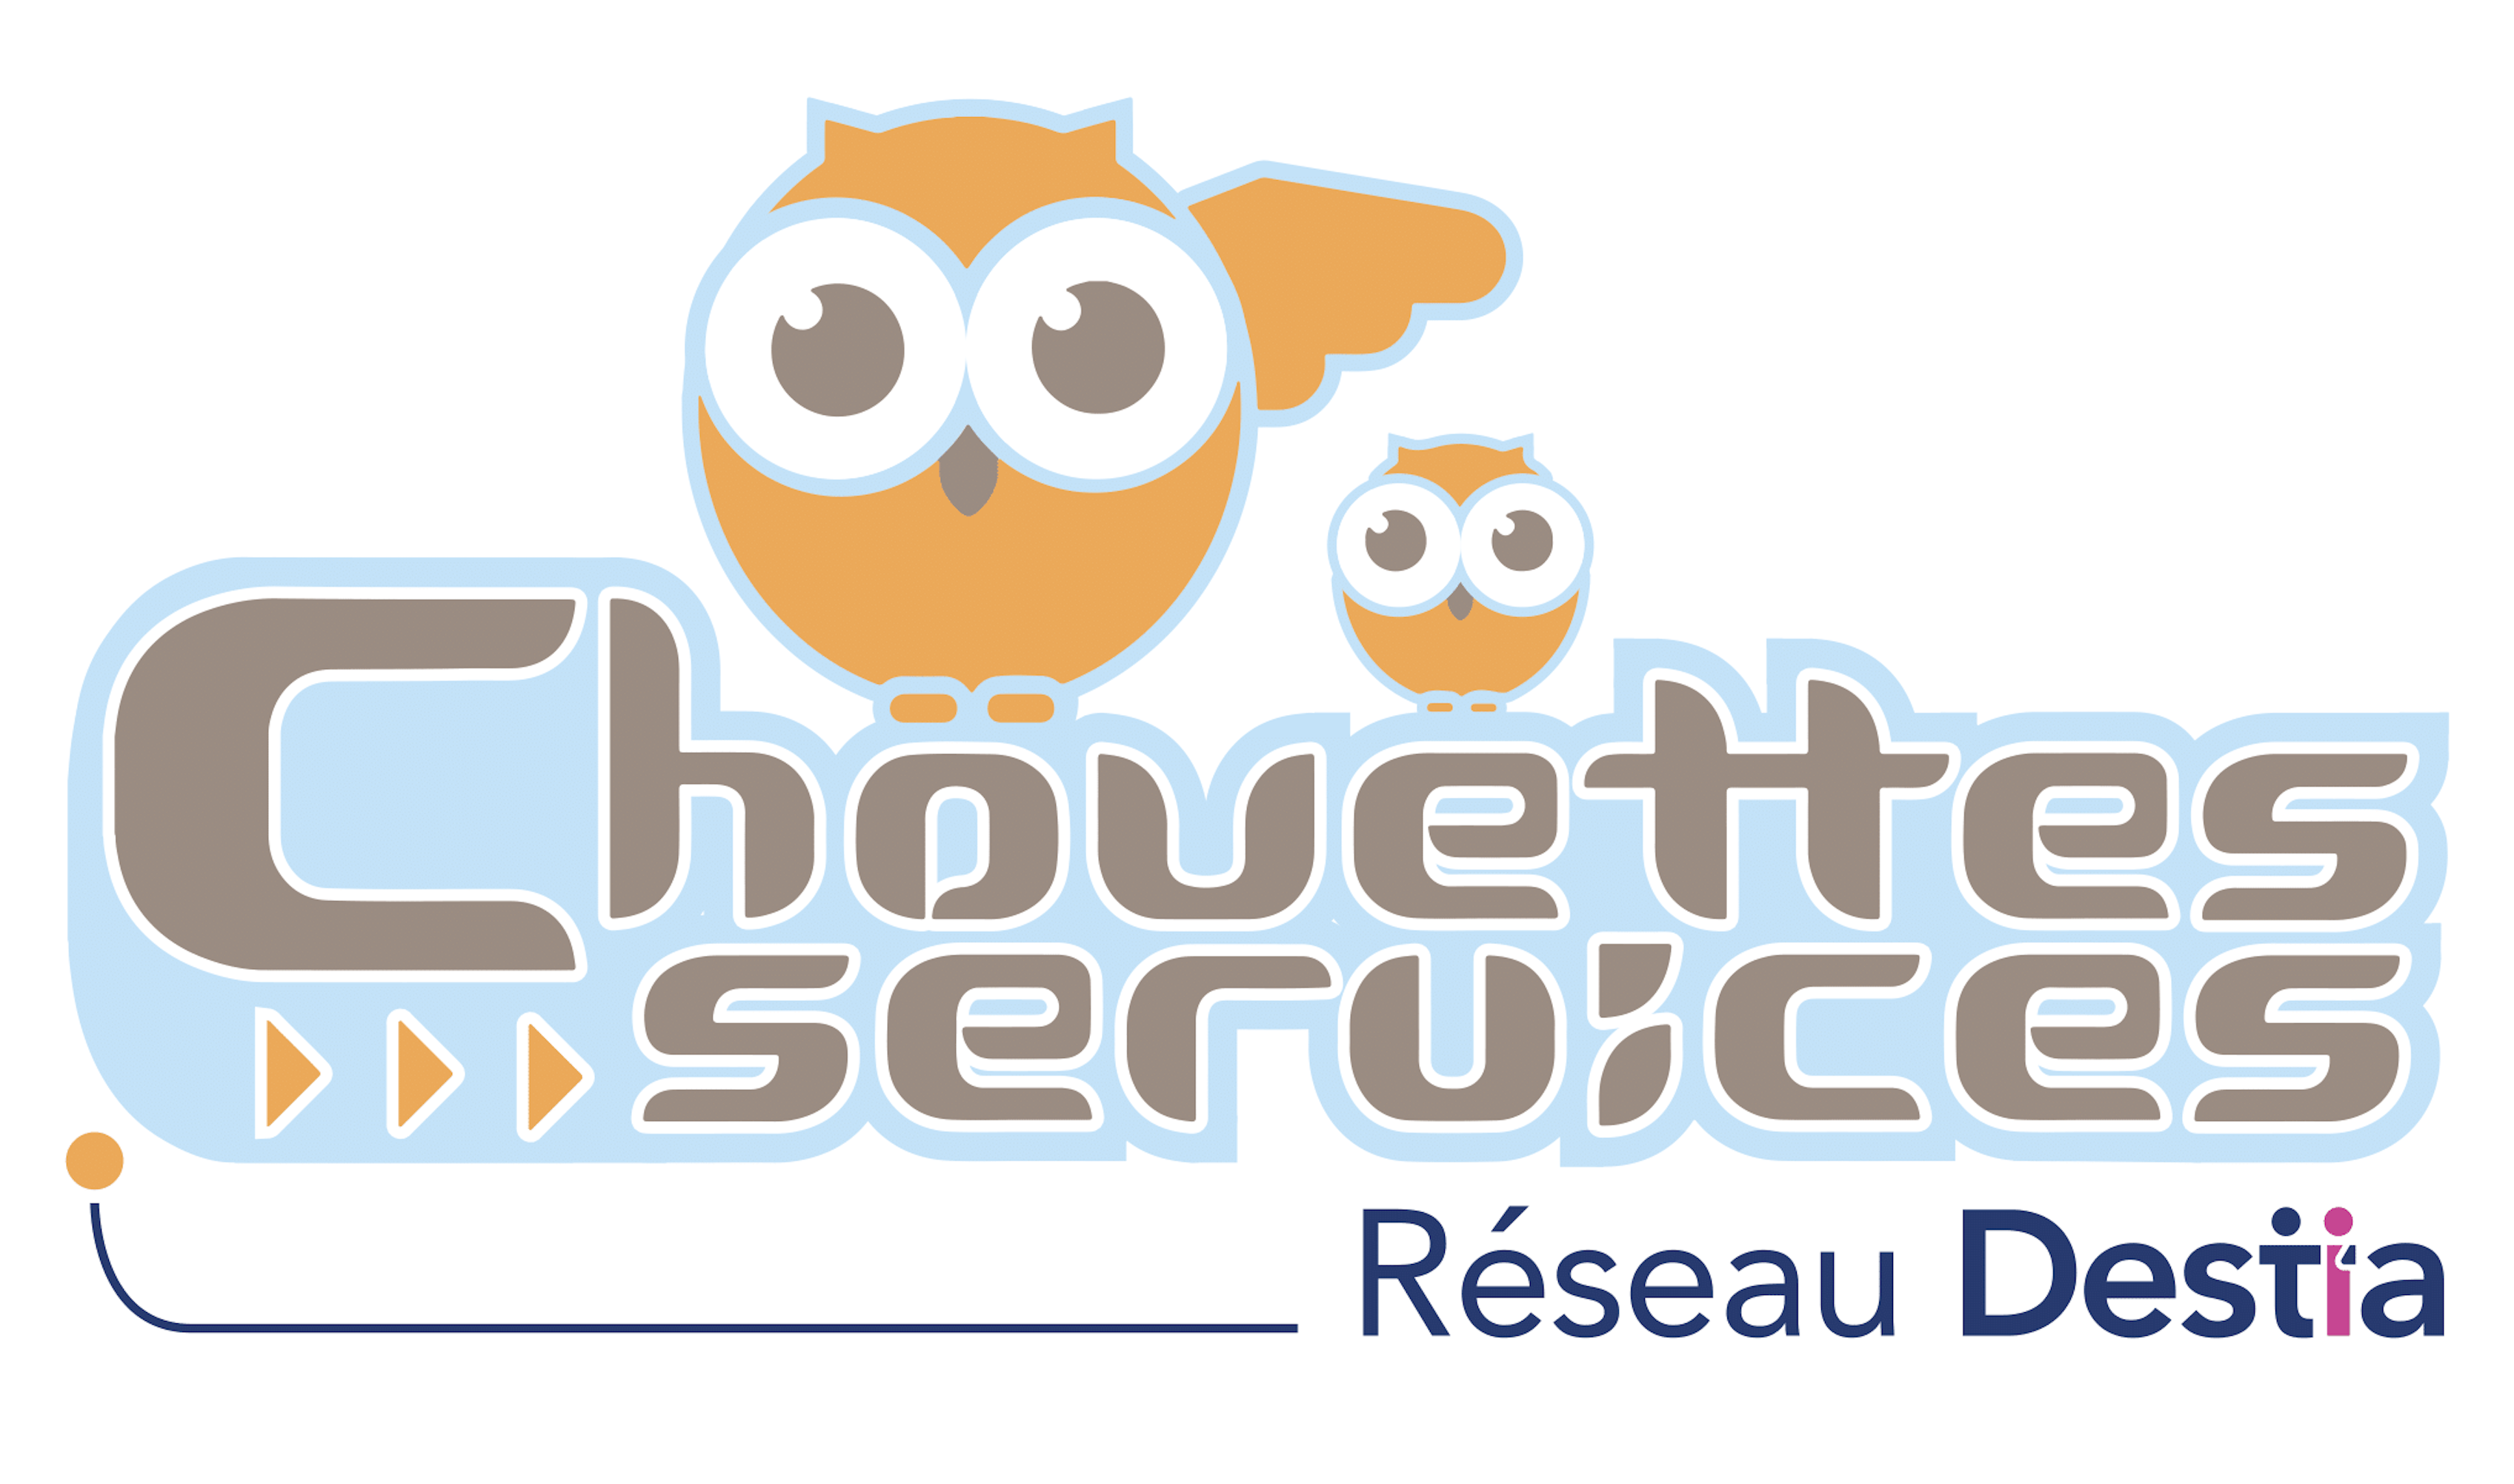 Chouettes Services